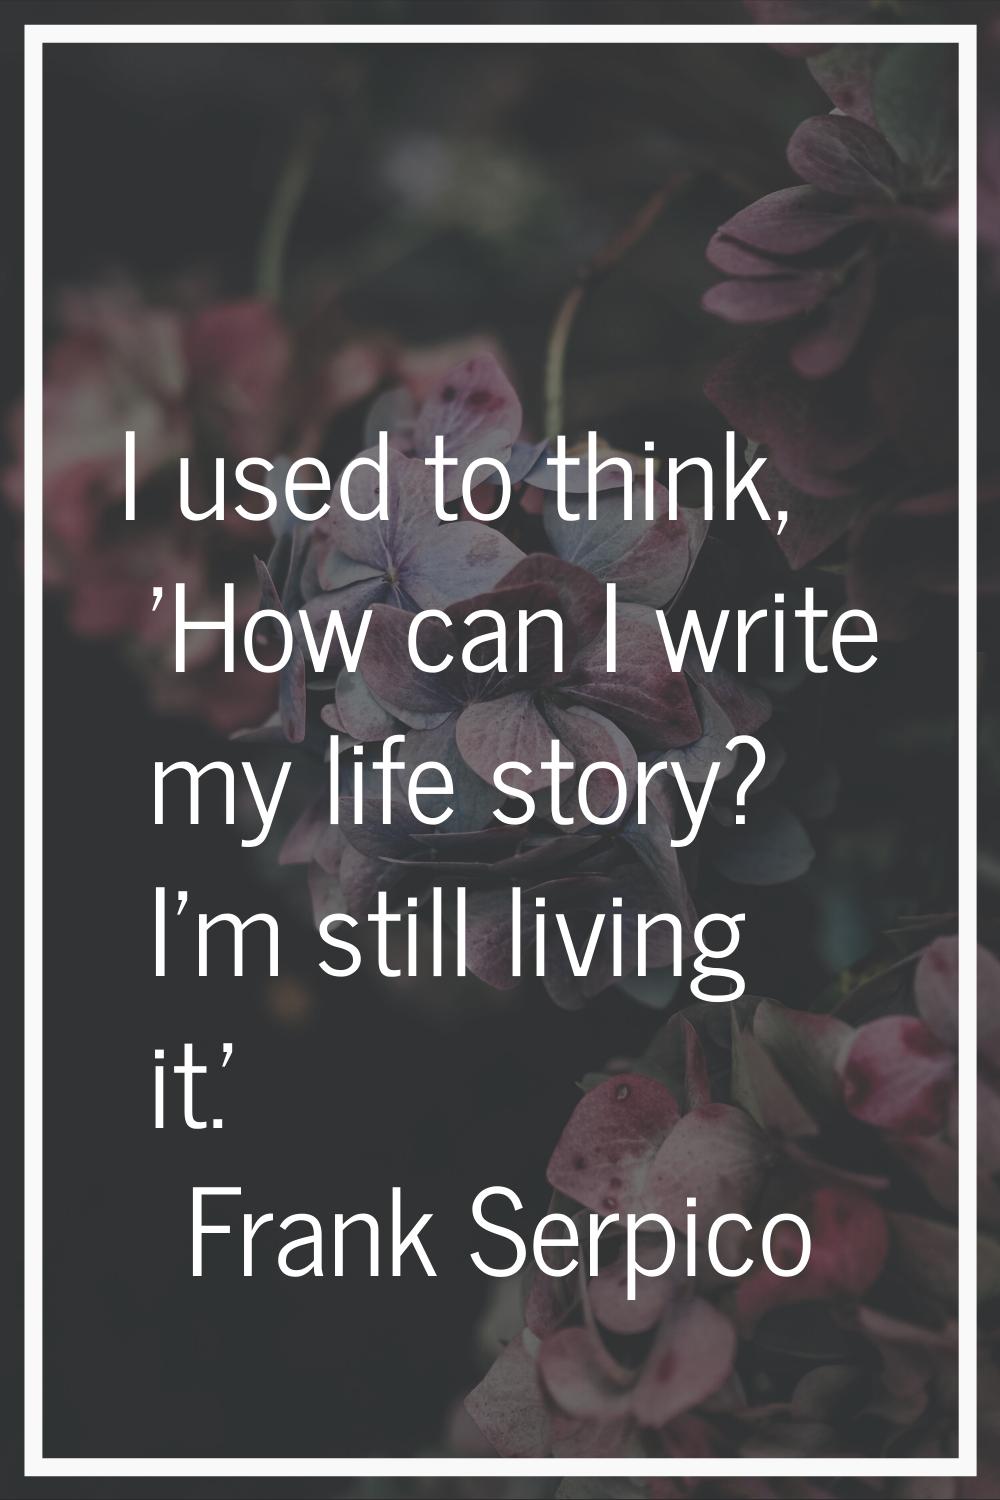 I used to think, 'How can I write my life story? I'm still living it.'